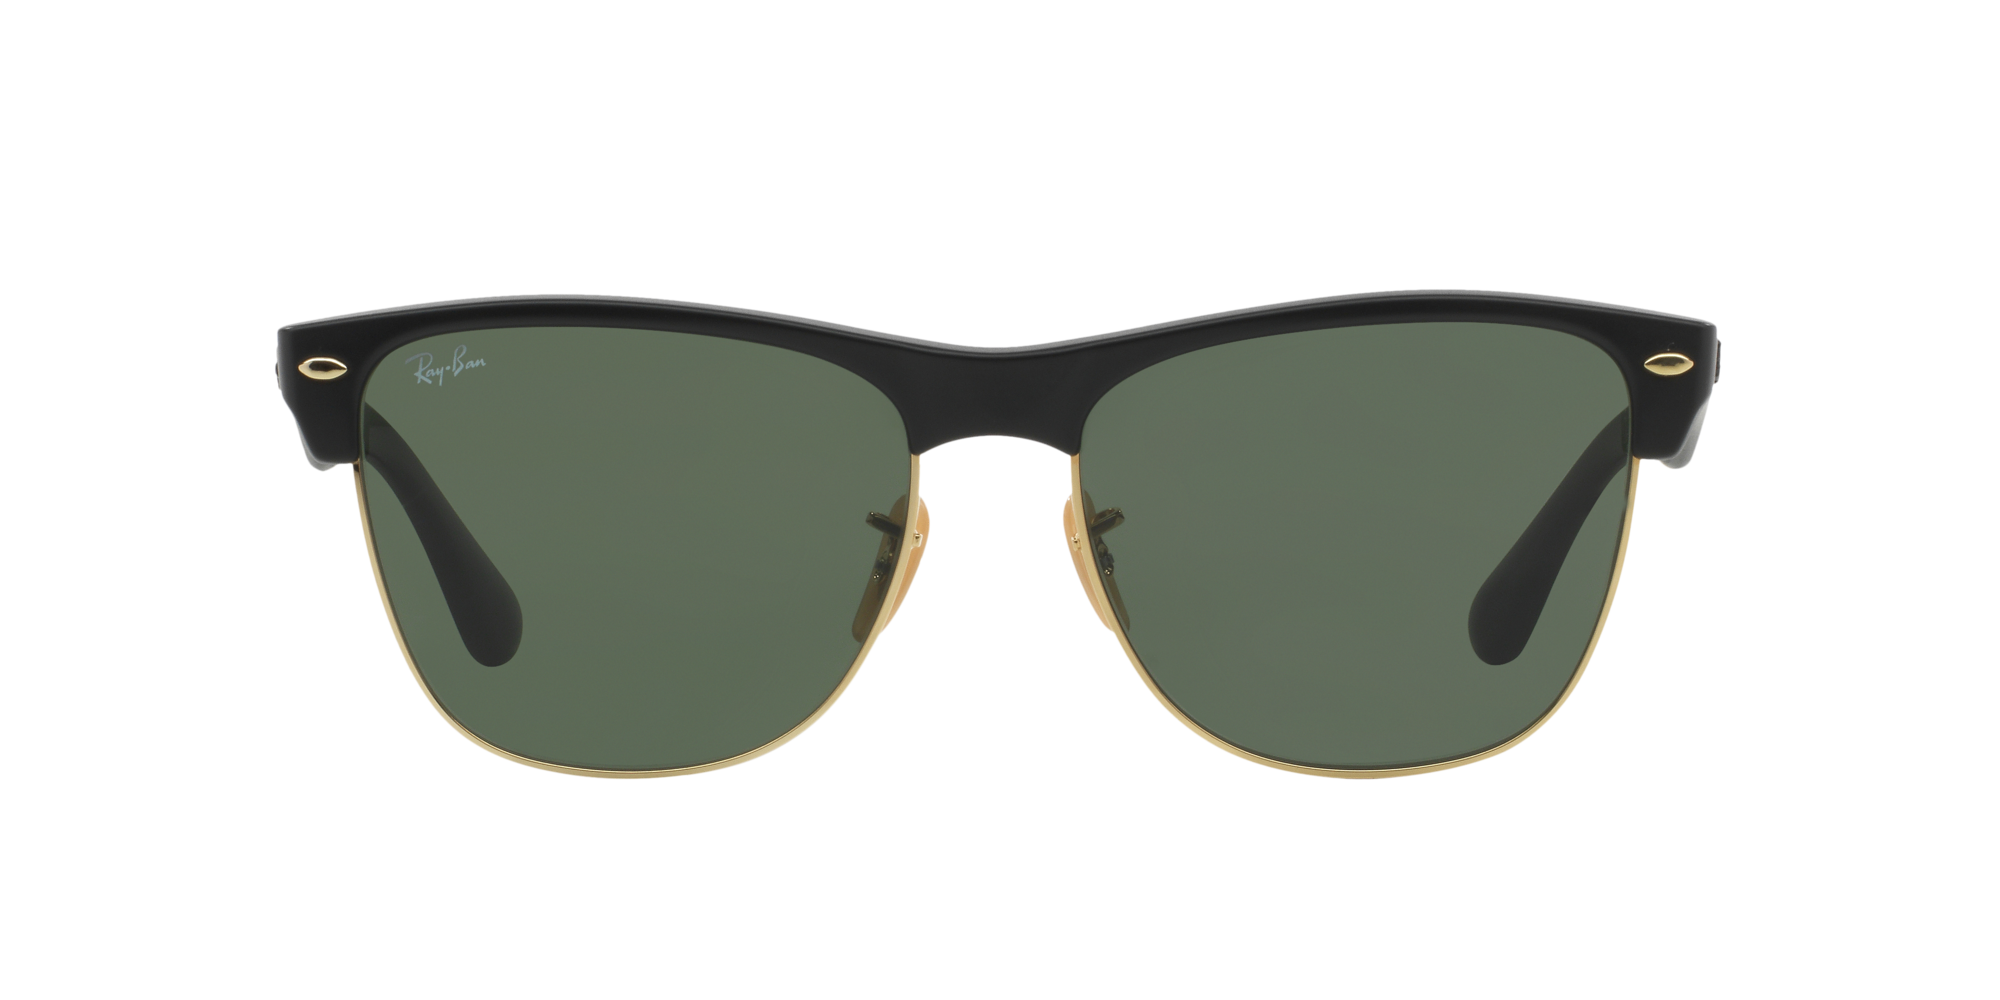 RAY-BAN CLUBMASTER OVERSIZED RB 4175 877, , hi-res image number 1